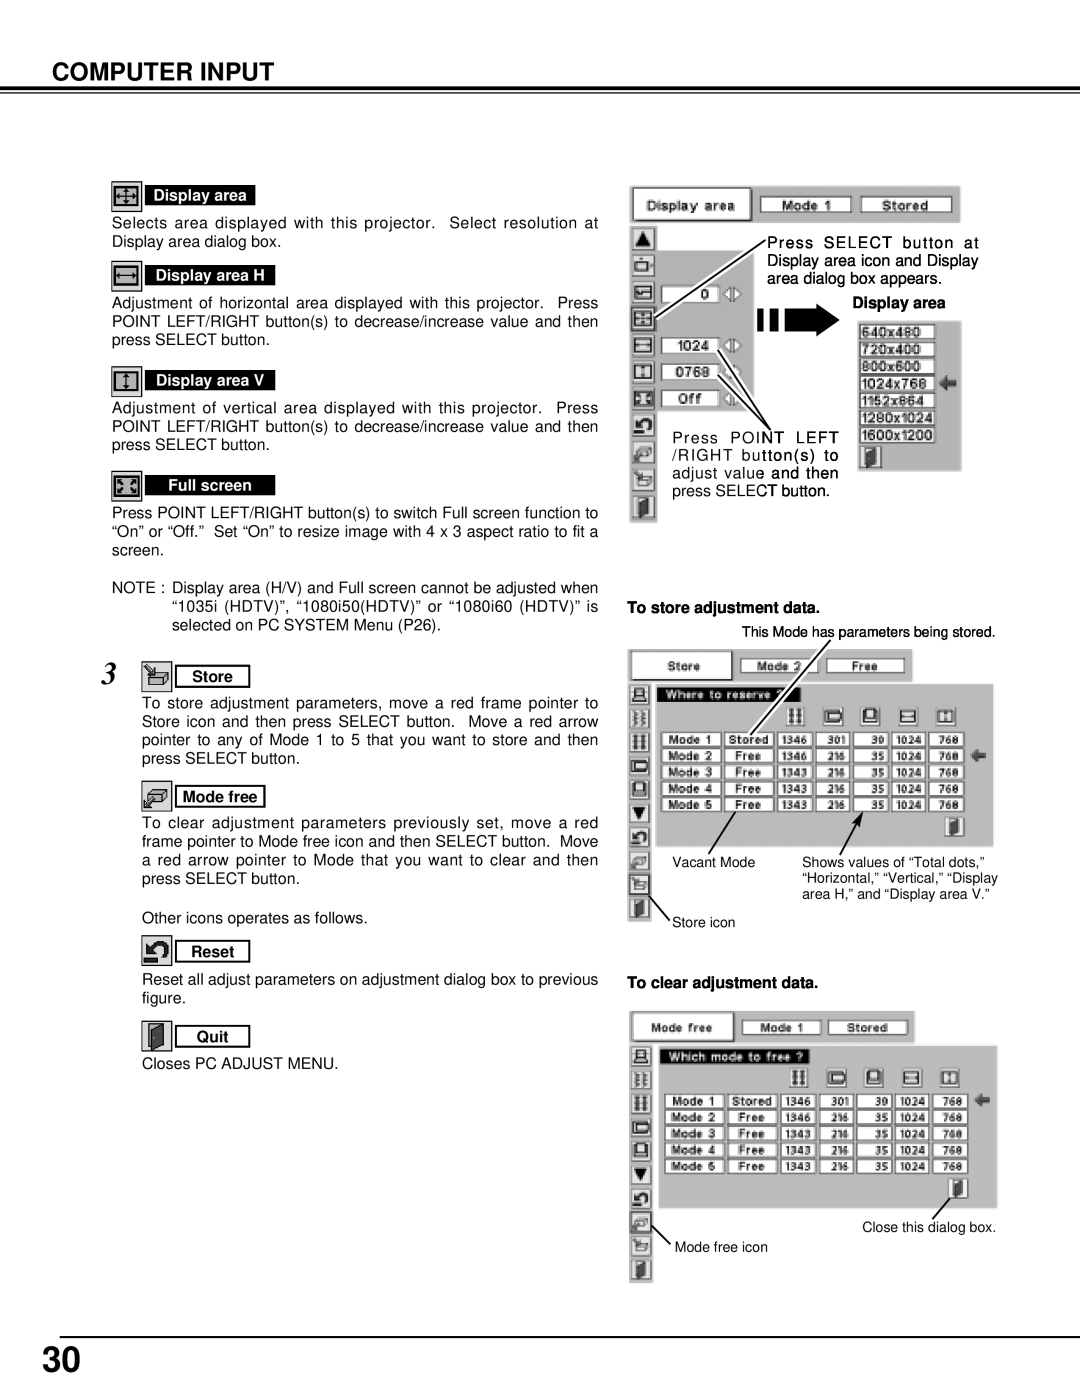 Christie Digital Systems 38-VIV301-01 user manual Computer Input, Other icons operates as follows 